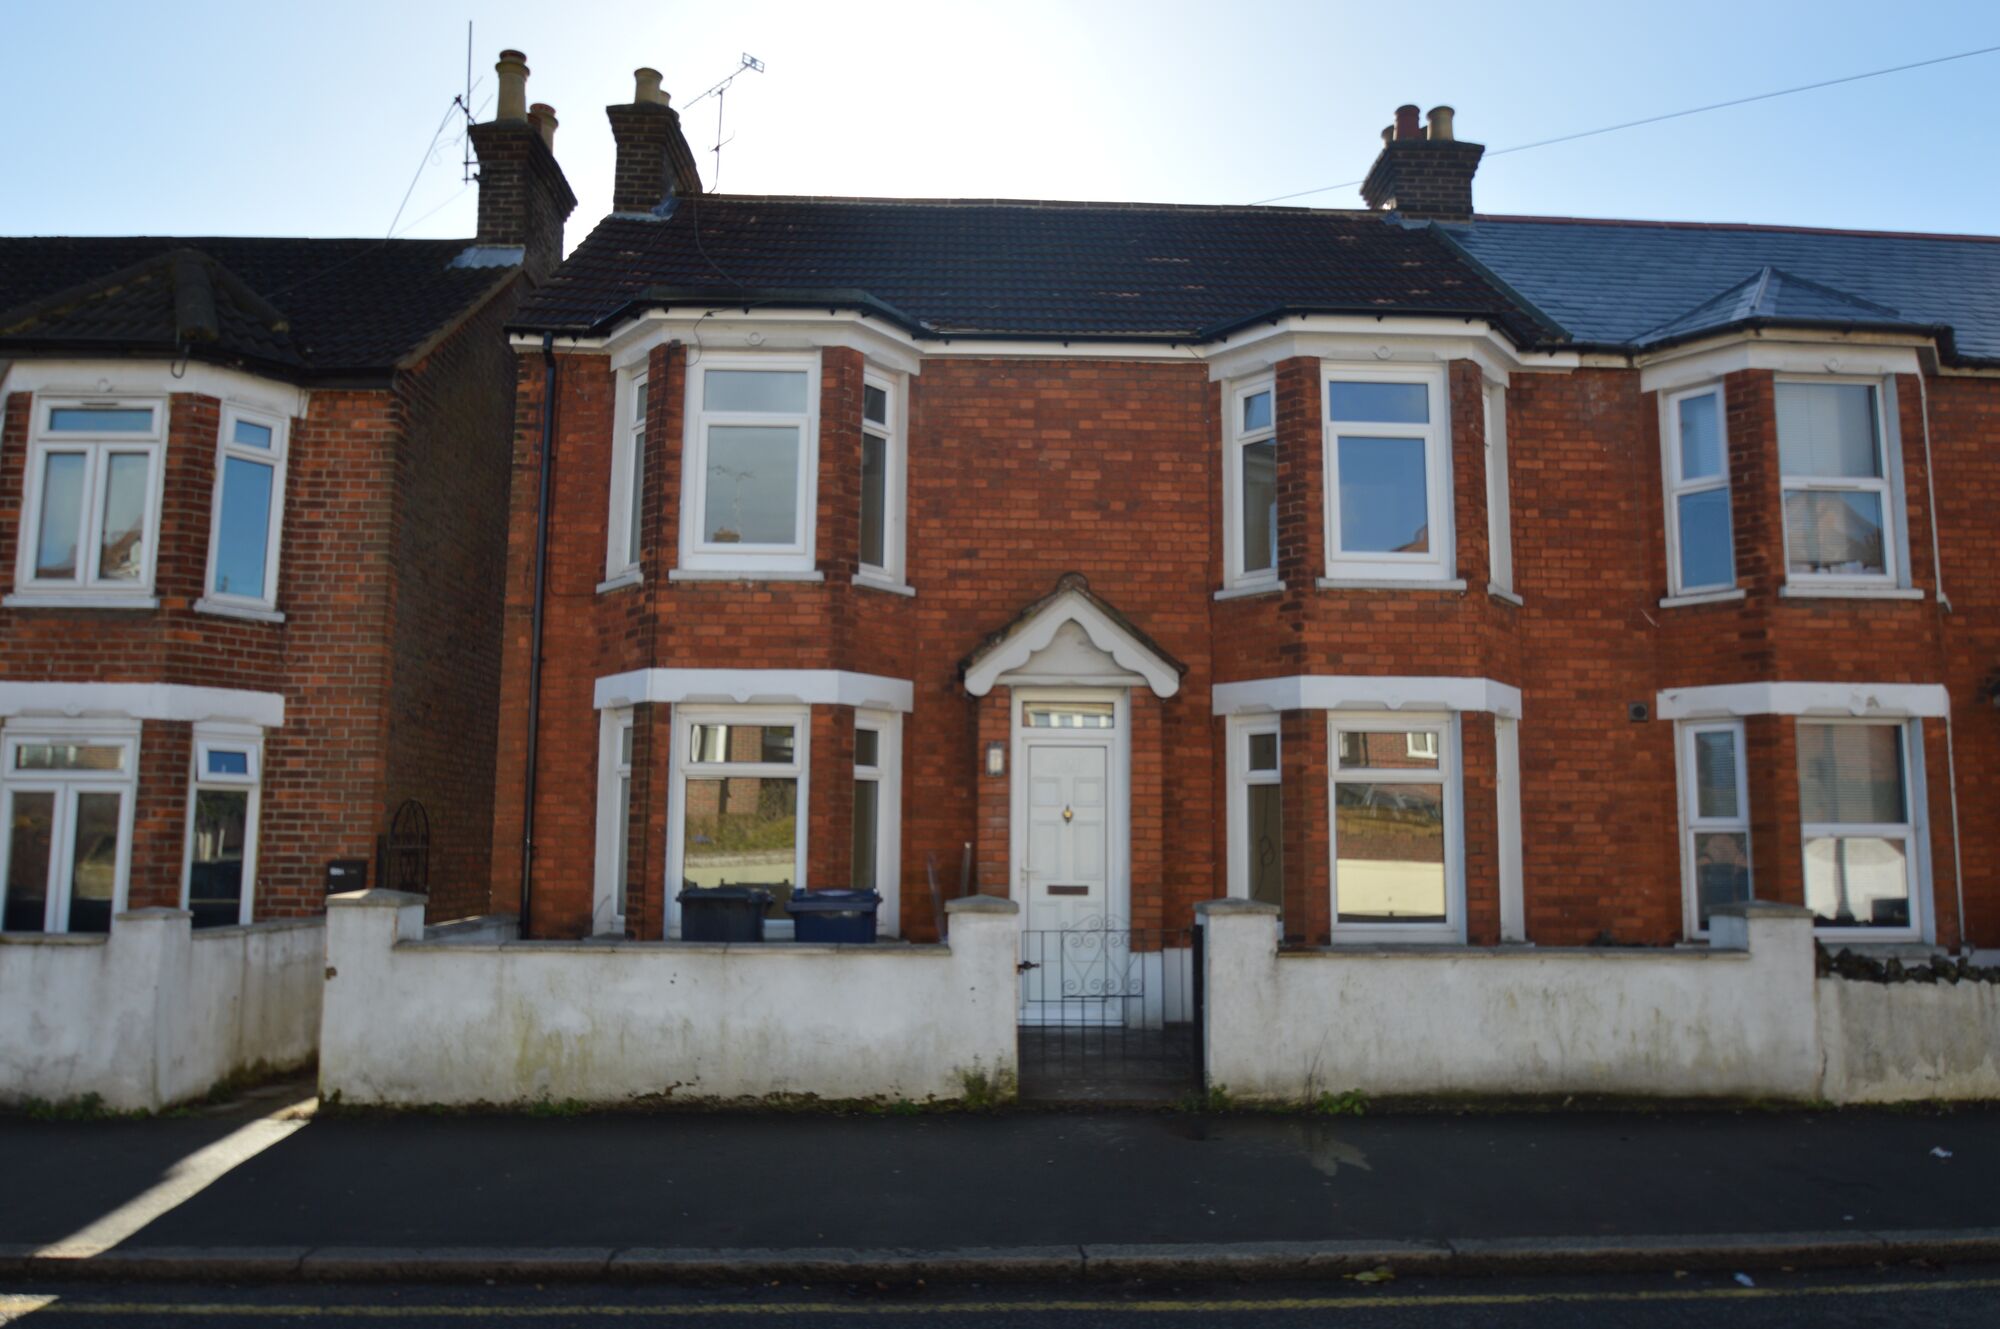 3 bedroom semi detached house to rent, Available unfurnished now Totteridge Road, High Wycombe, HP13, main image